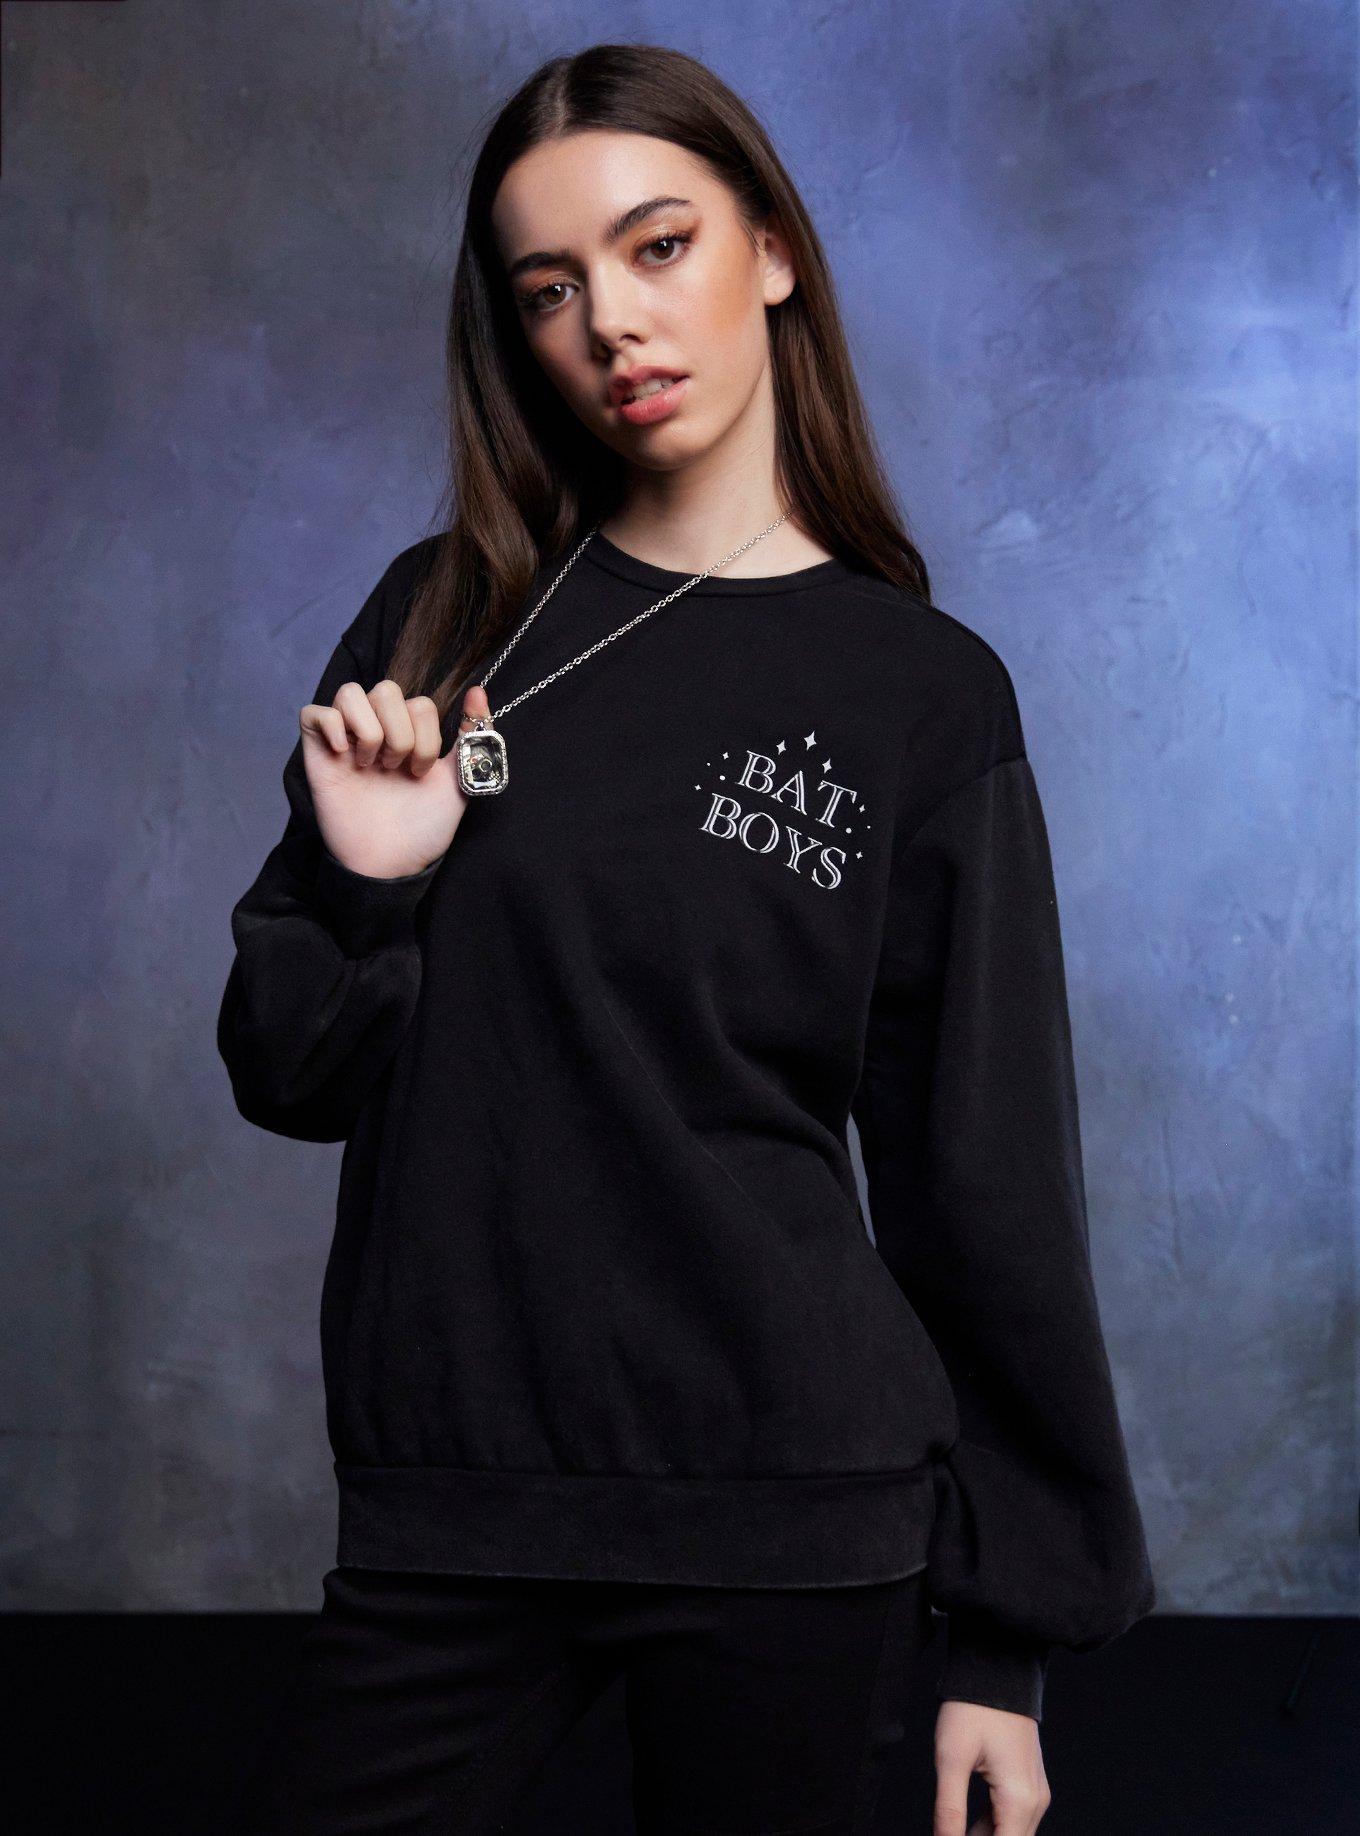 A Court Of Thorns And Roses Bat Boys Oversized Sweatshirt, BLACK MINERAL WASH, hi-res